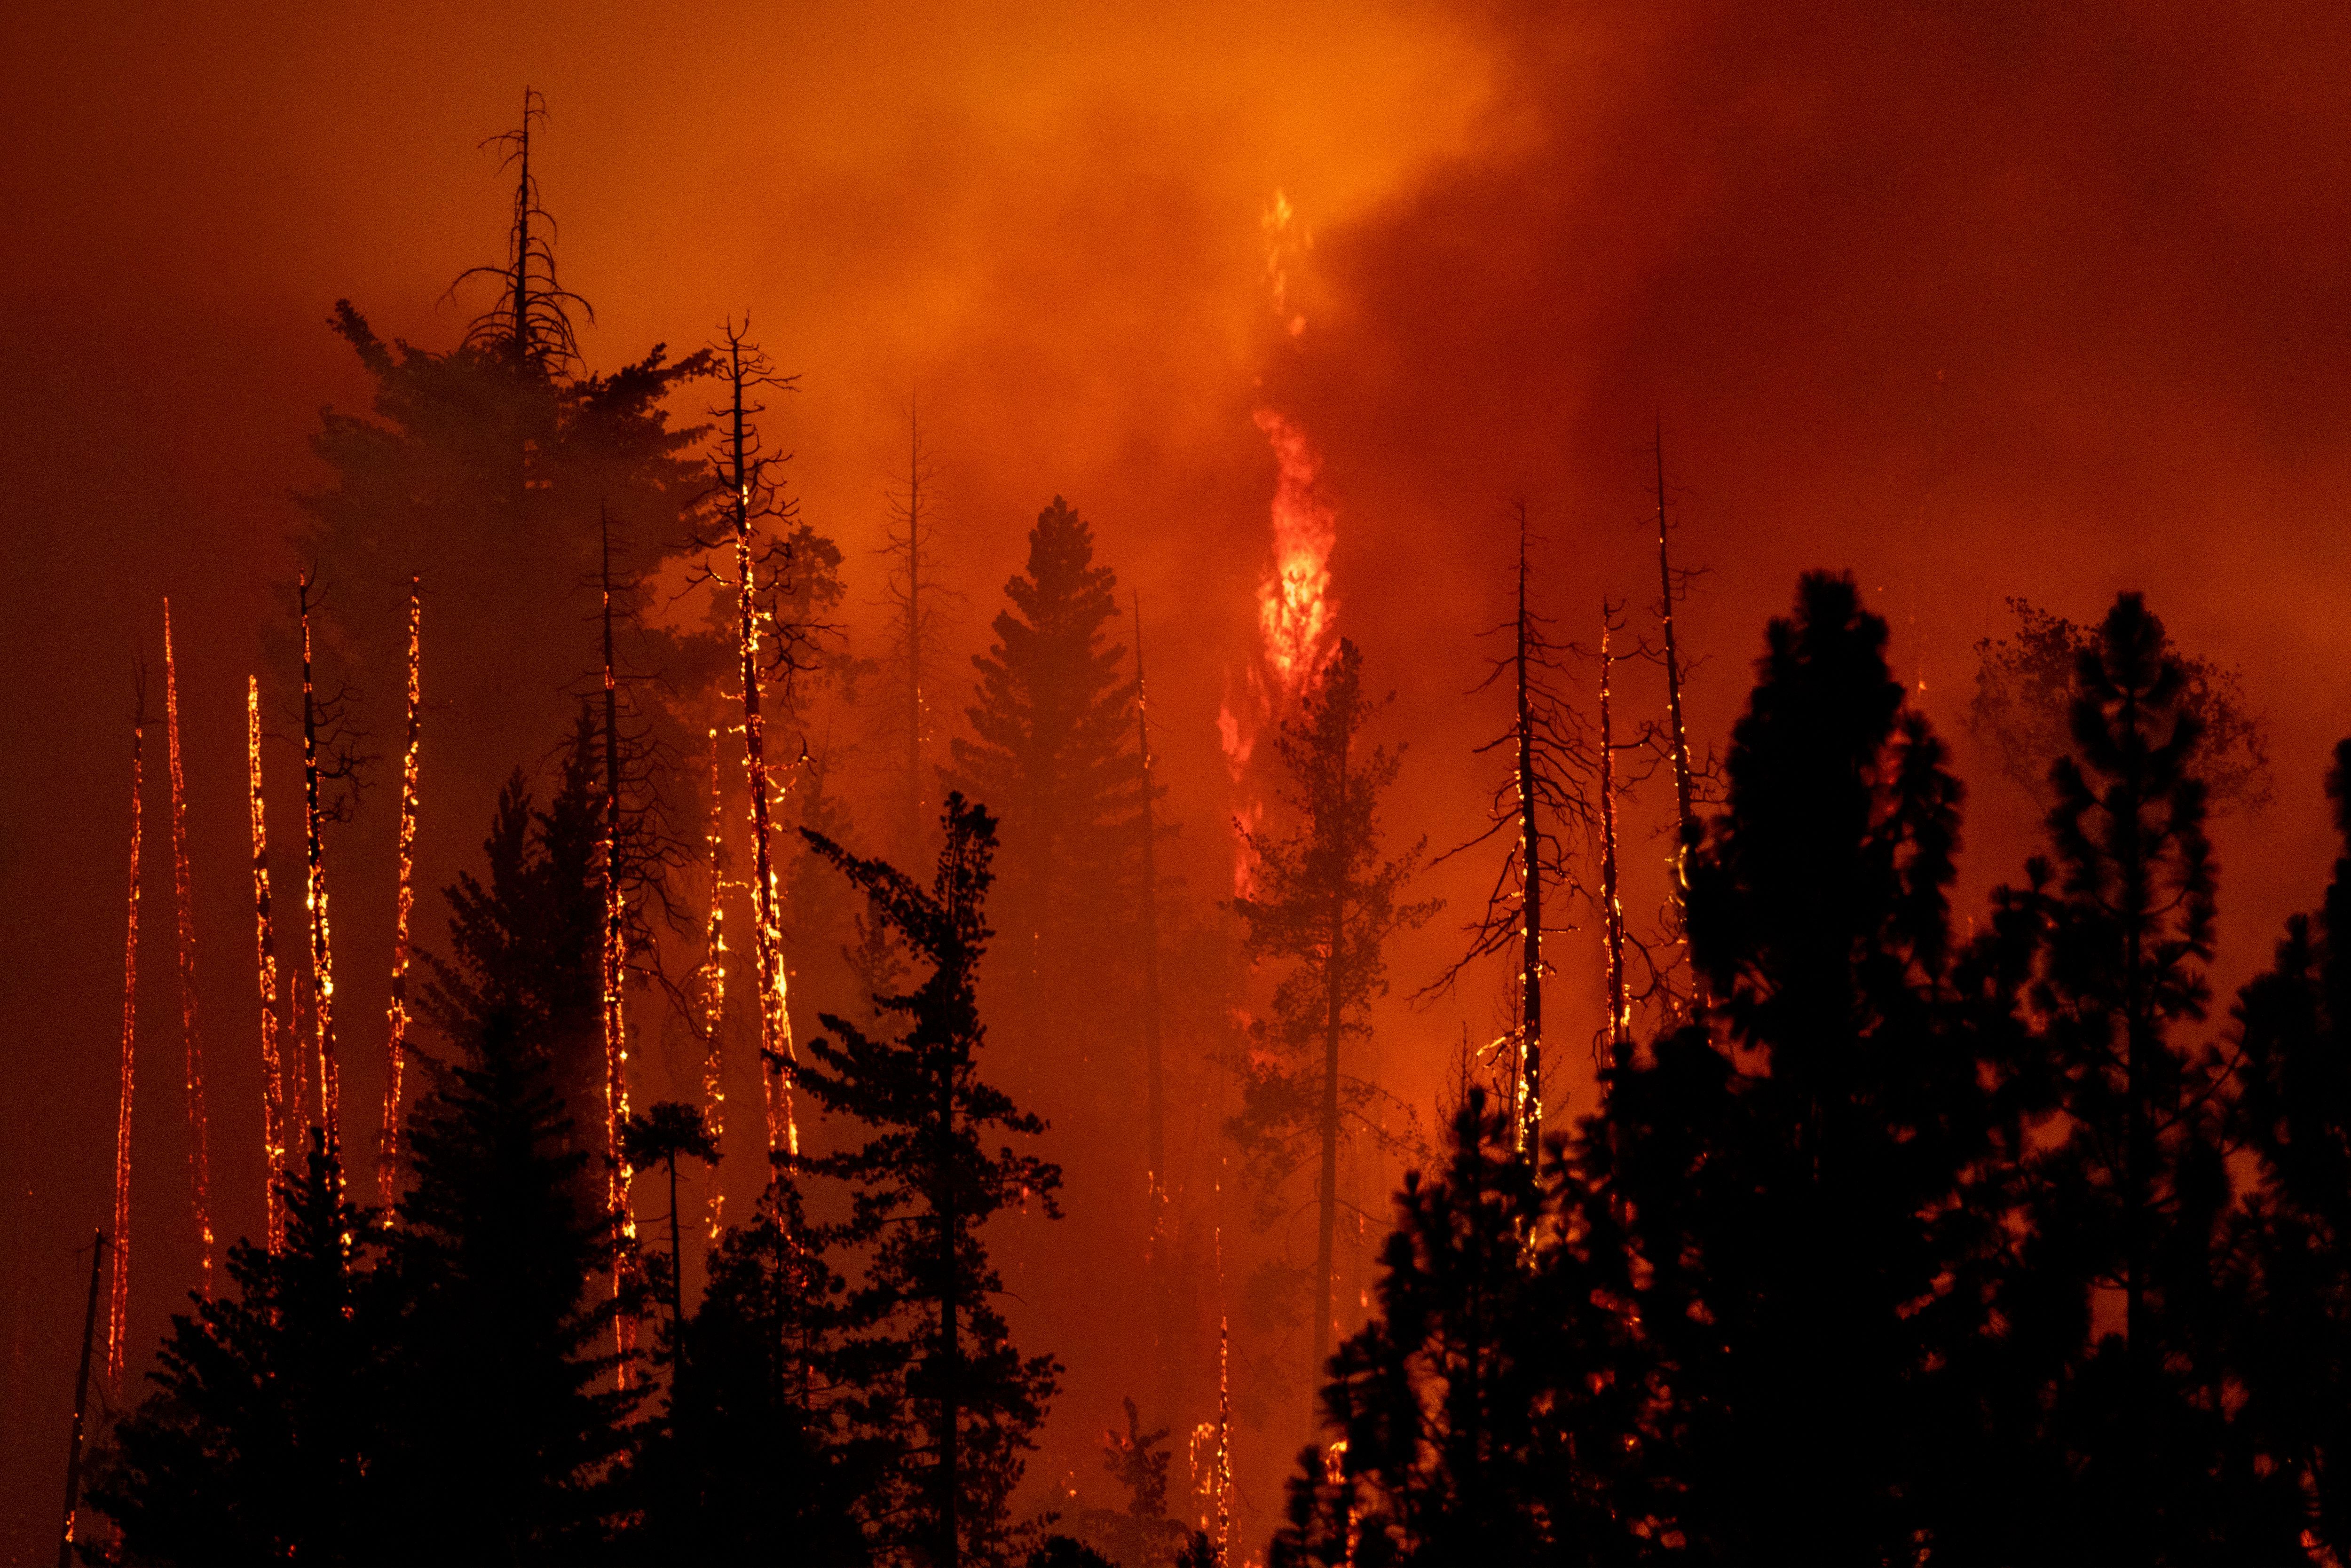  A forest is incinerated by the Oak Fire near Midpines, northeast of Mariposa, California, on July 23.